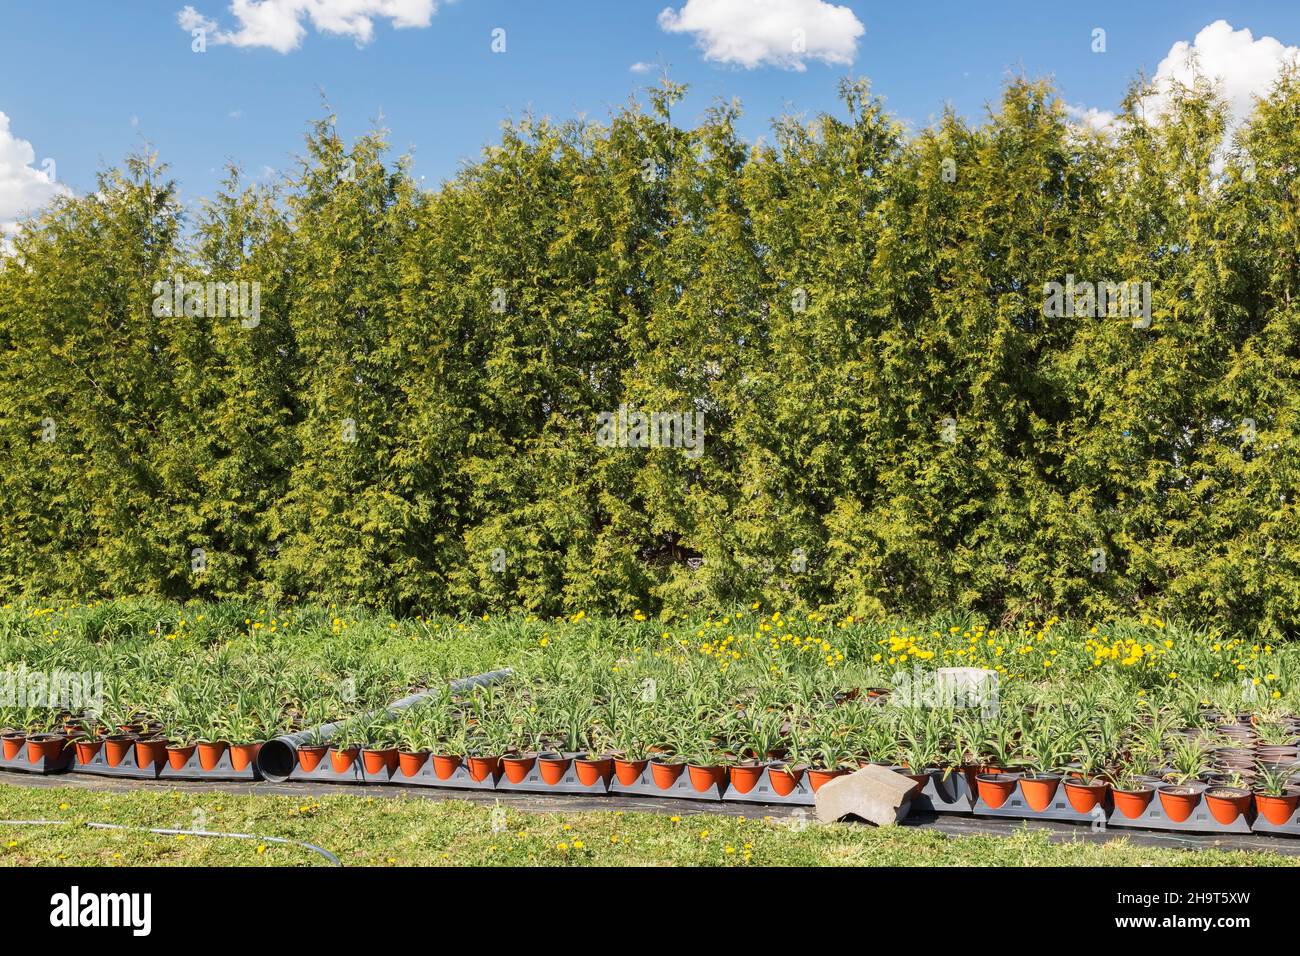 Rows of mixed plants in plastic terracotta containers, Thuja occidentalis - Cedar tree hedge in spring. Stock Photo